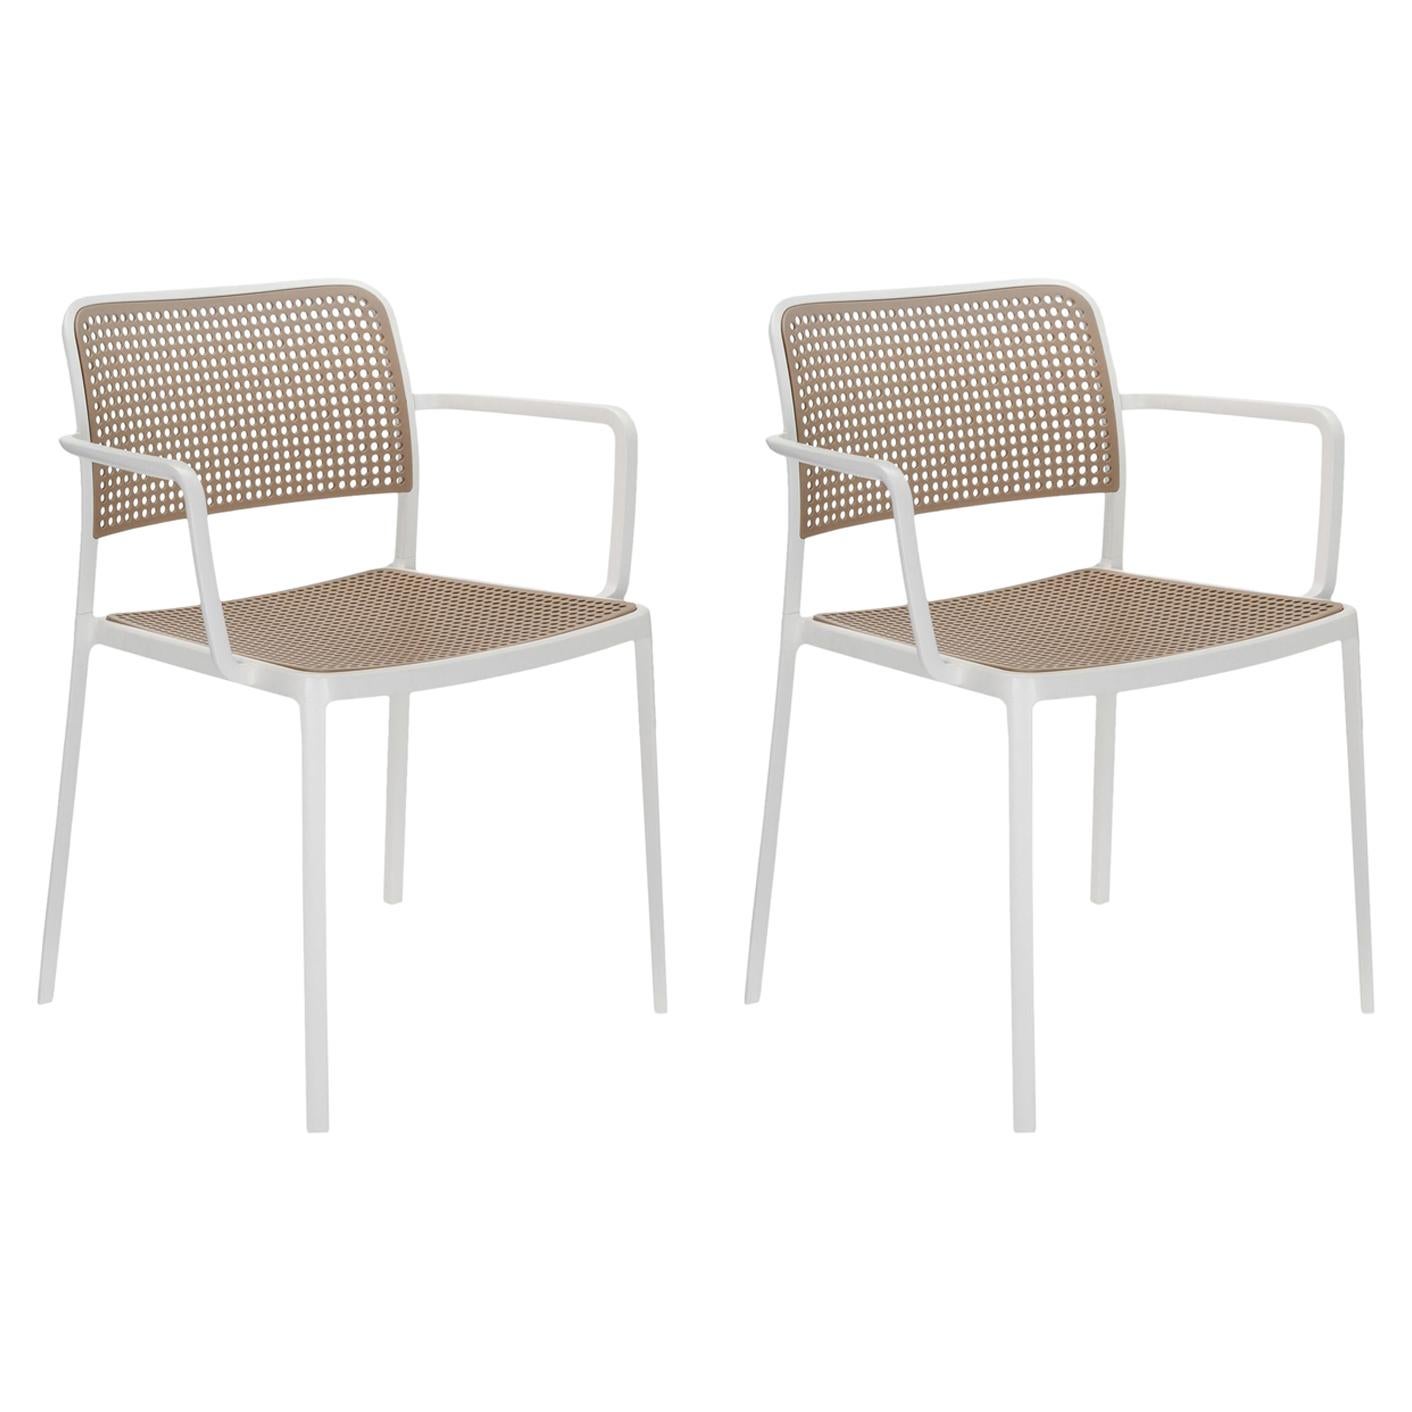 Set of 2 Kartell Audrey Chair by Piero Lissoni in Sand